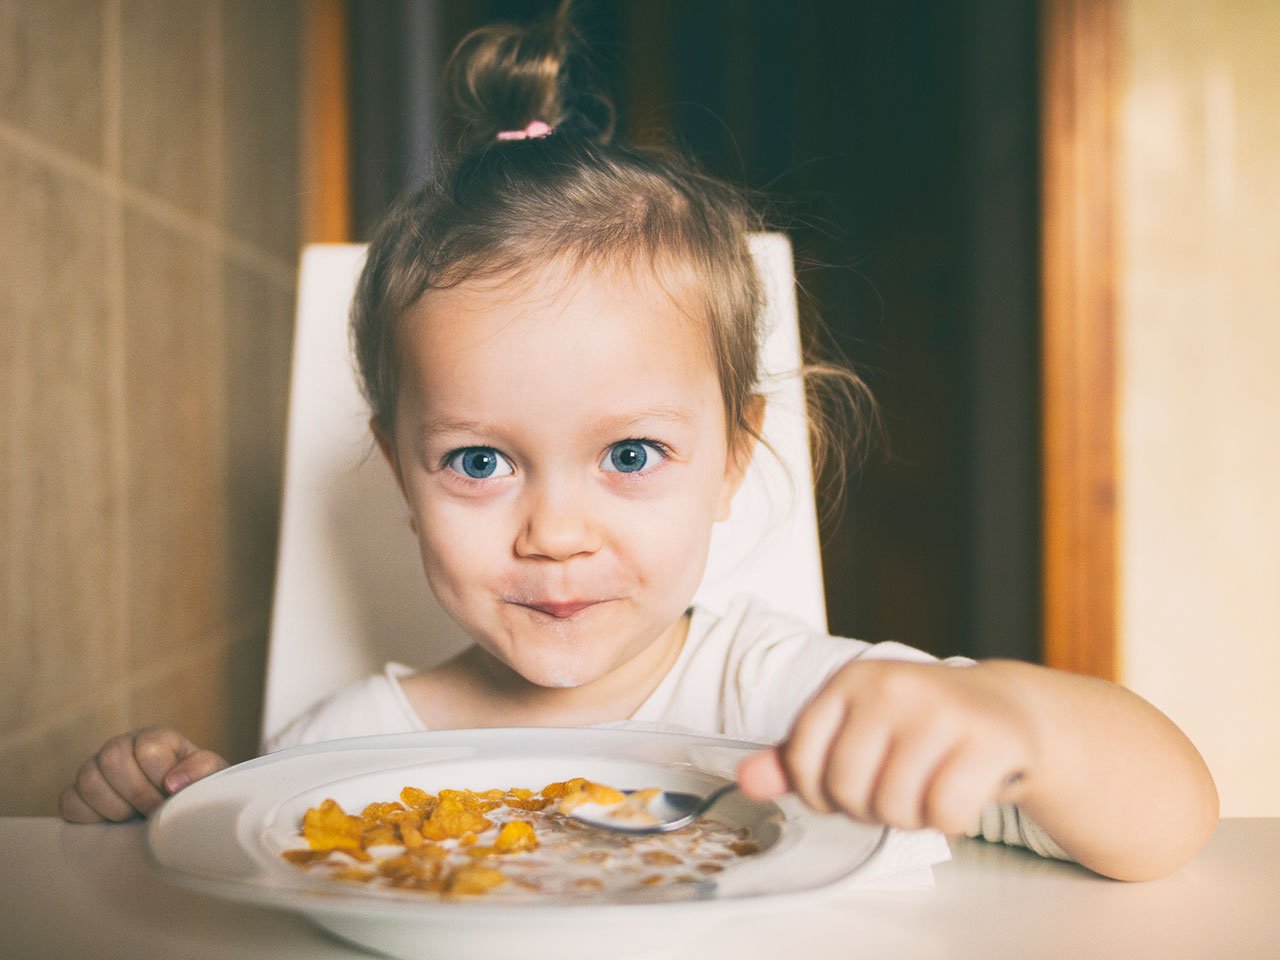 A little kid smiles while eating a bowl of cereal